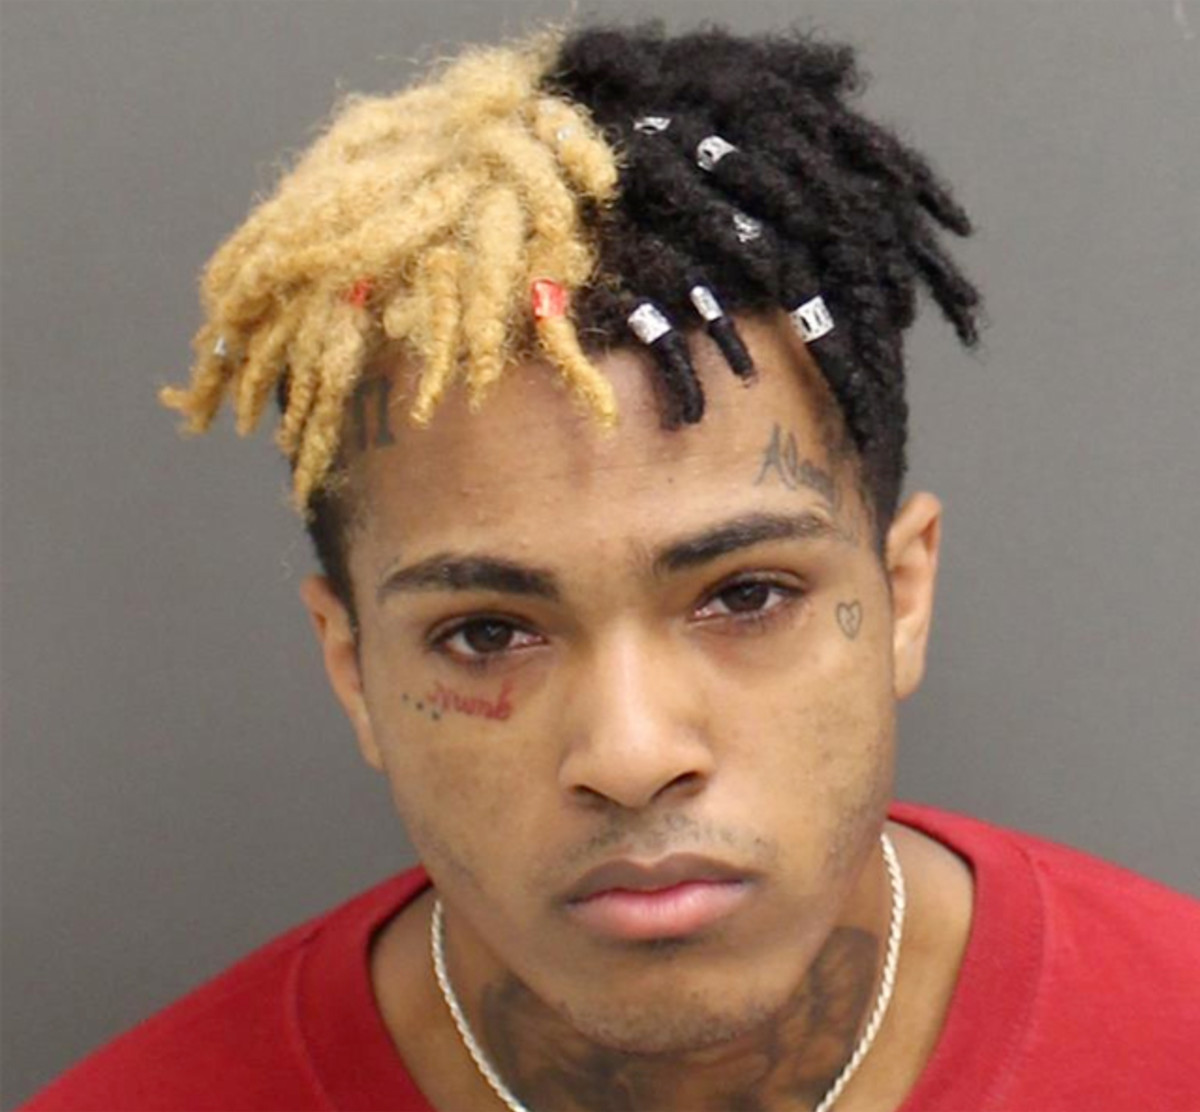 Xxxtentacion Posts Video Appearing To Hang Himself On Instagram